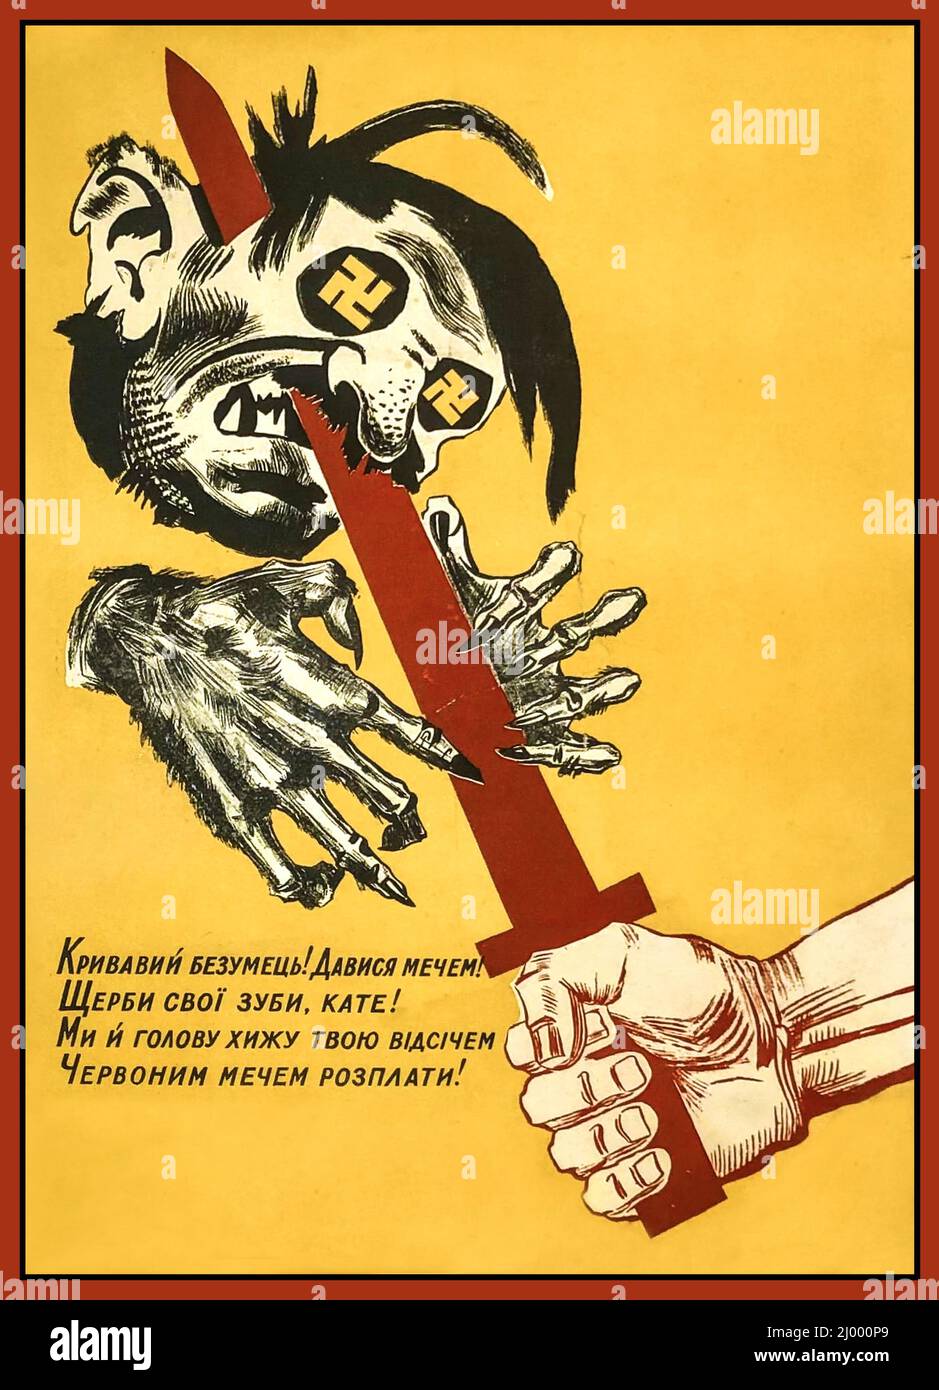 WW2 Ukraine Propaganda Poster 1941 Bloody madman! Choke with the sword! Grit your teeth, executioner! We will cut off your predatory head With a red sword of retribution!  Ukraine SSR, Kharkiv, 1941 Stock Photo